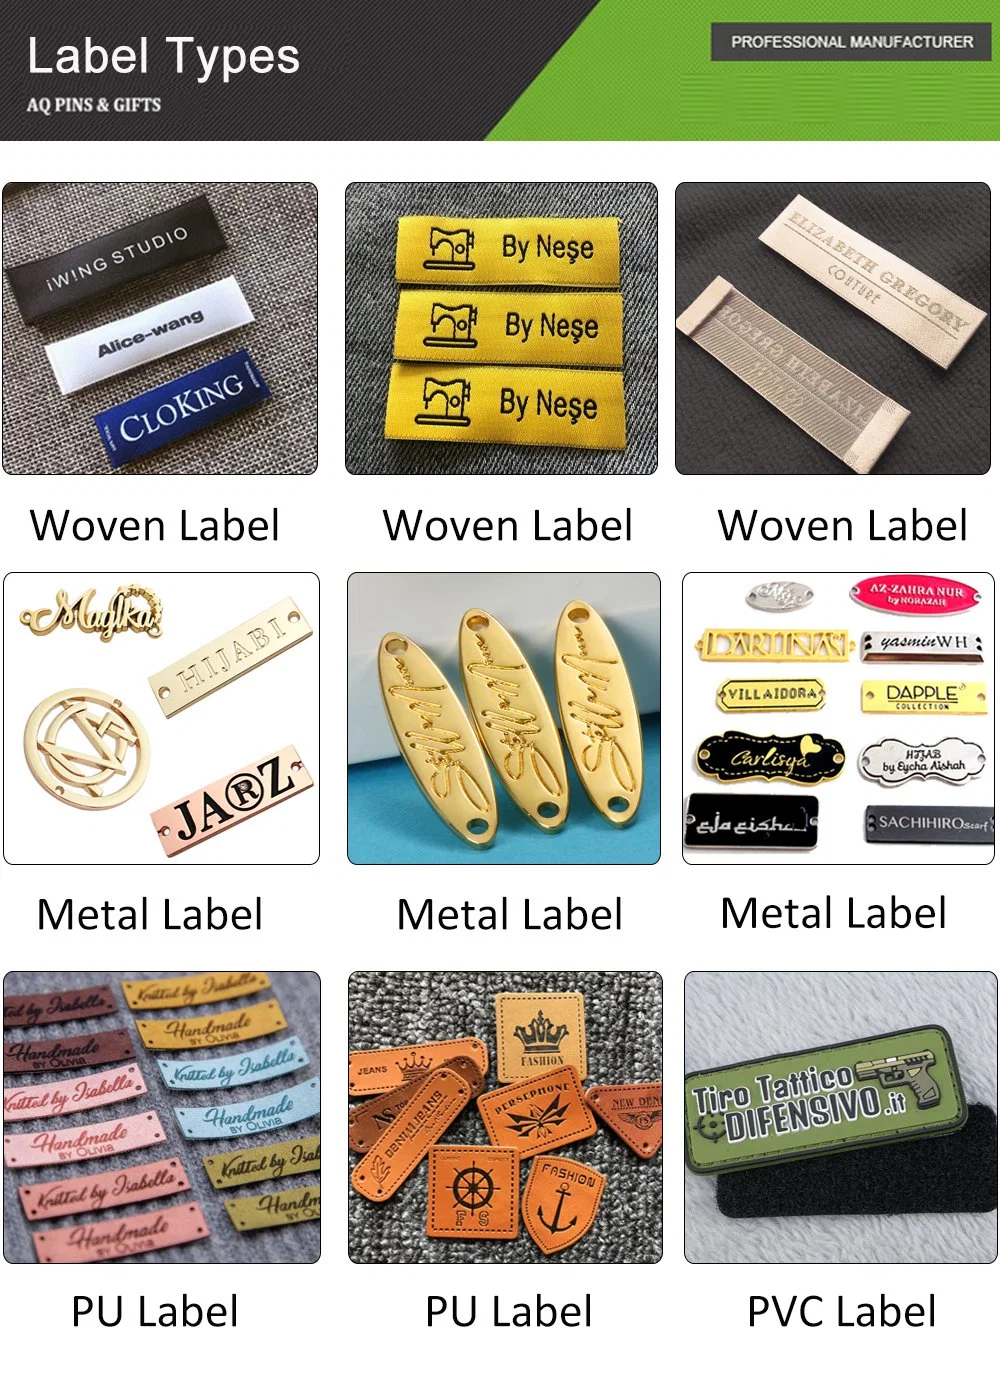 Custom Garment Private PVC Silicone Label Brands Name Woven Clothing Tag for T-Shirt